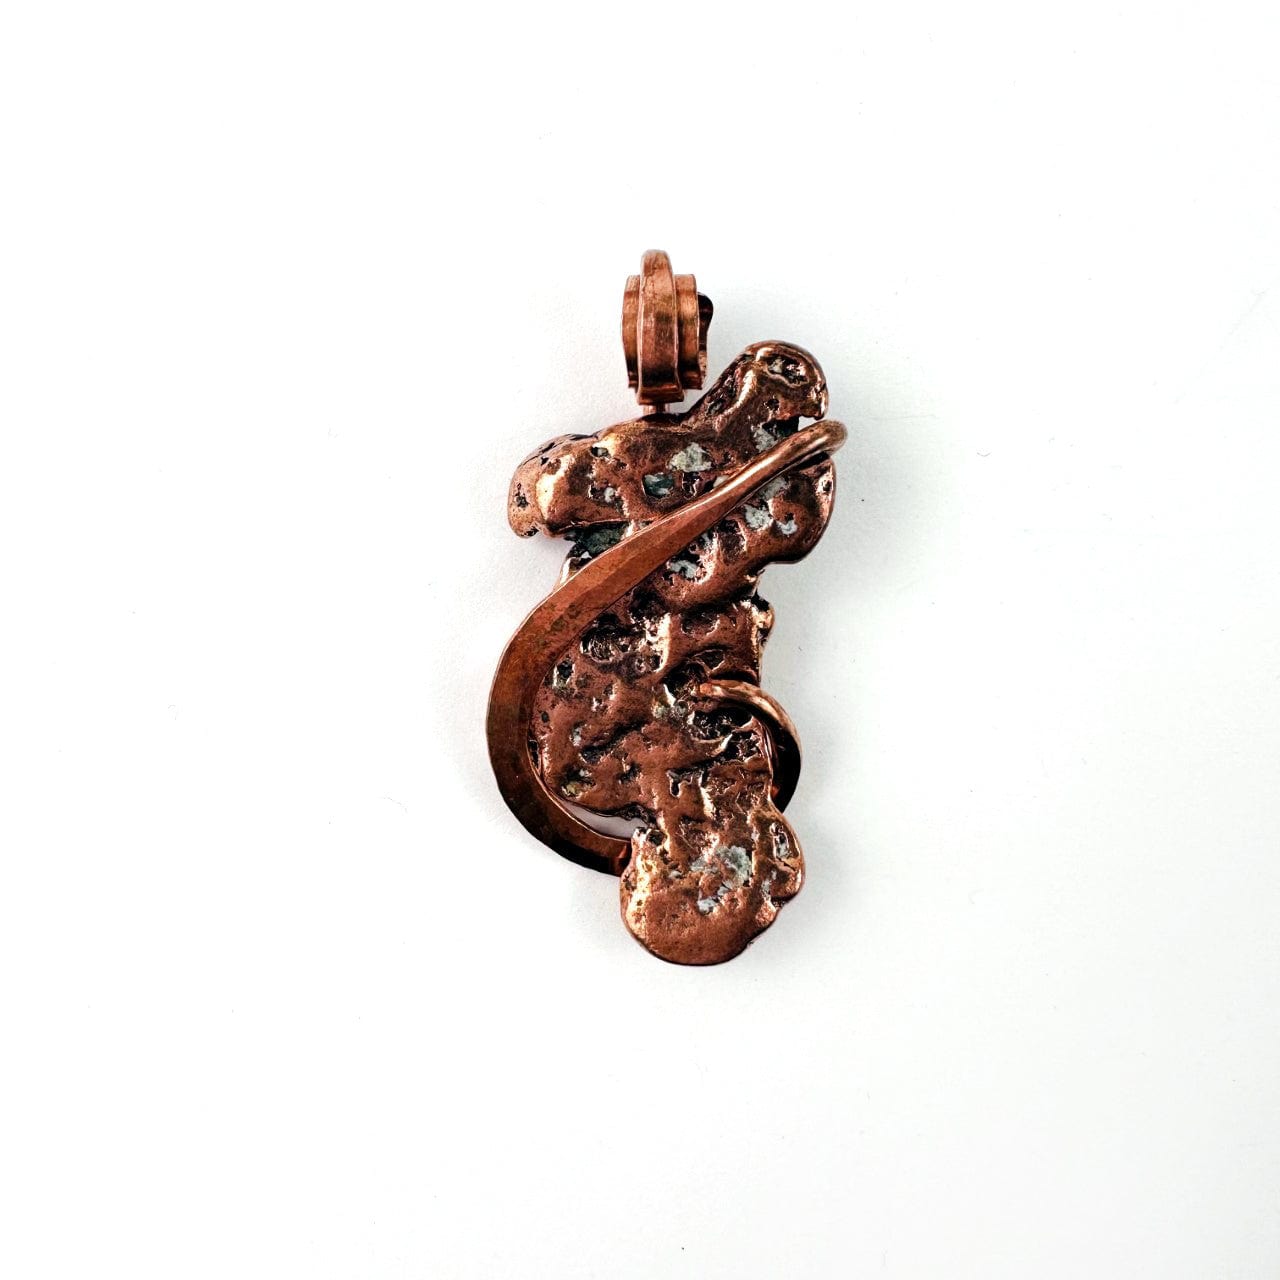 Copper Nugget Pendant on a white background